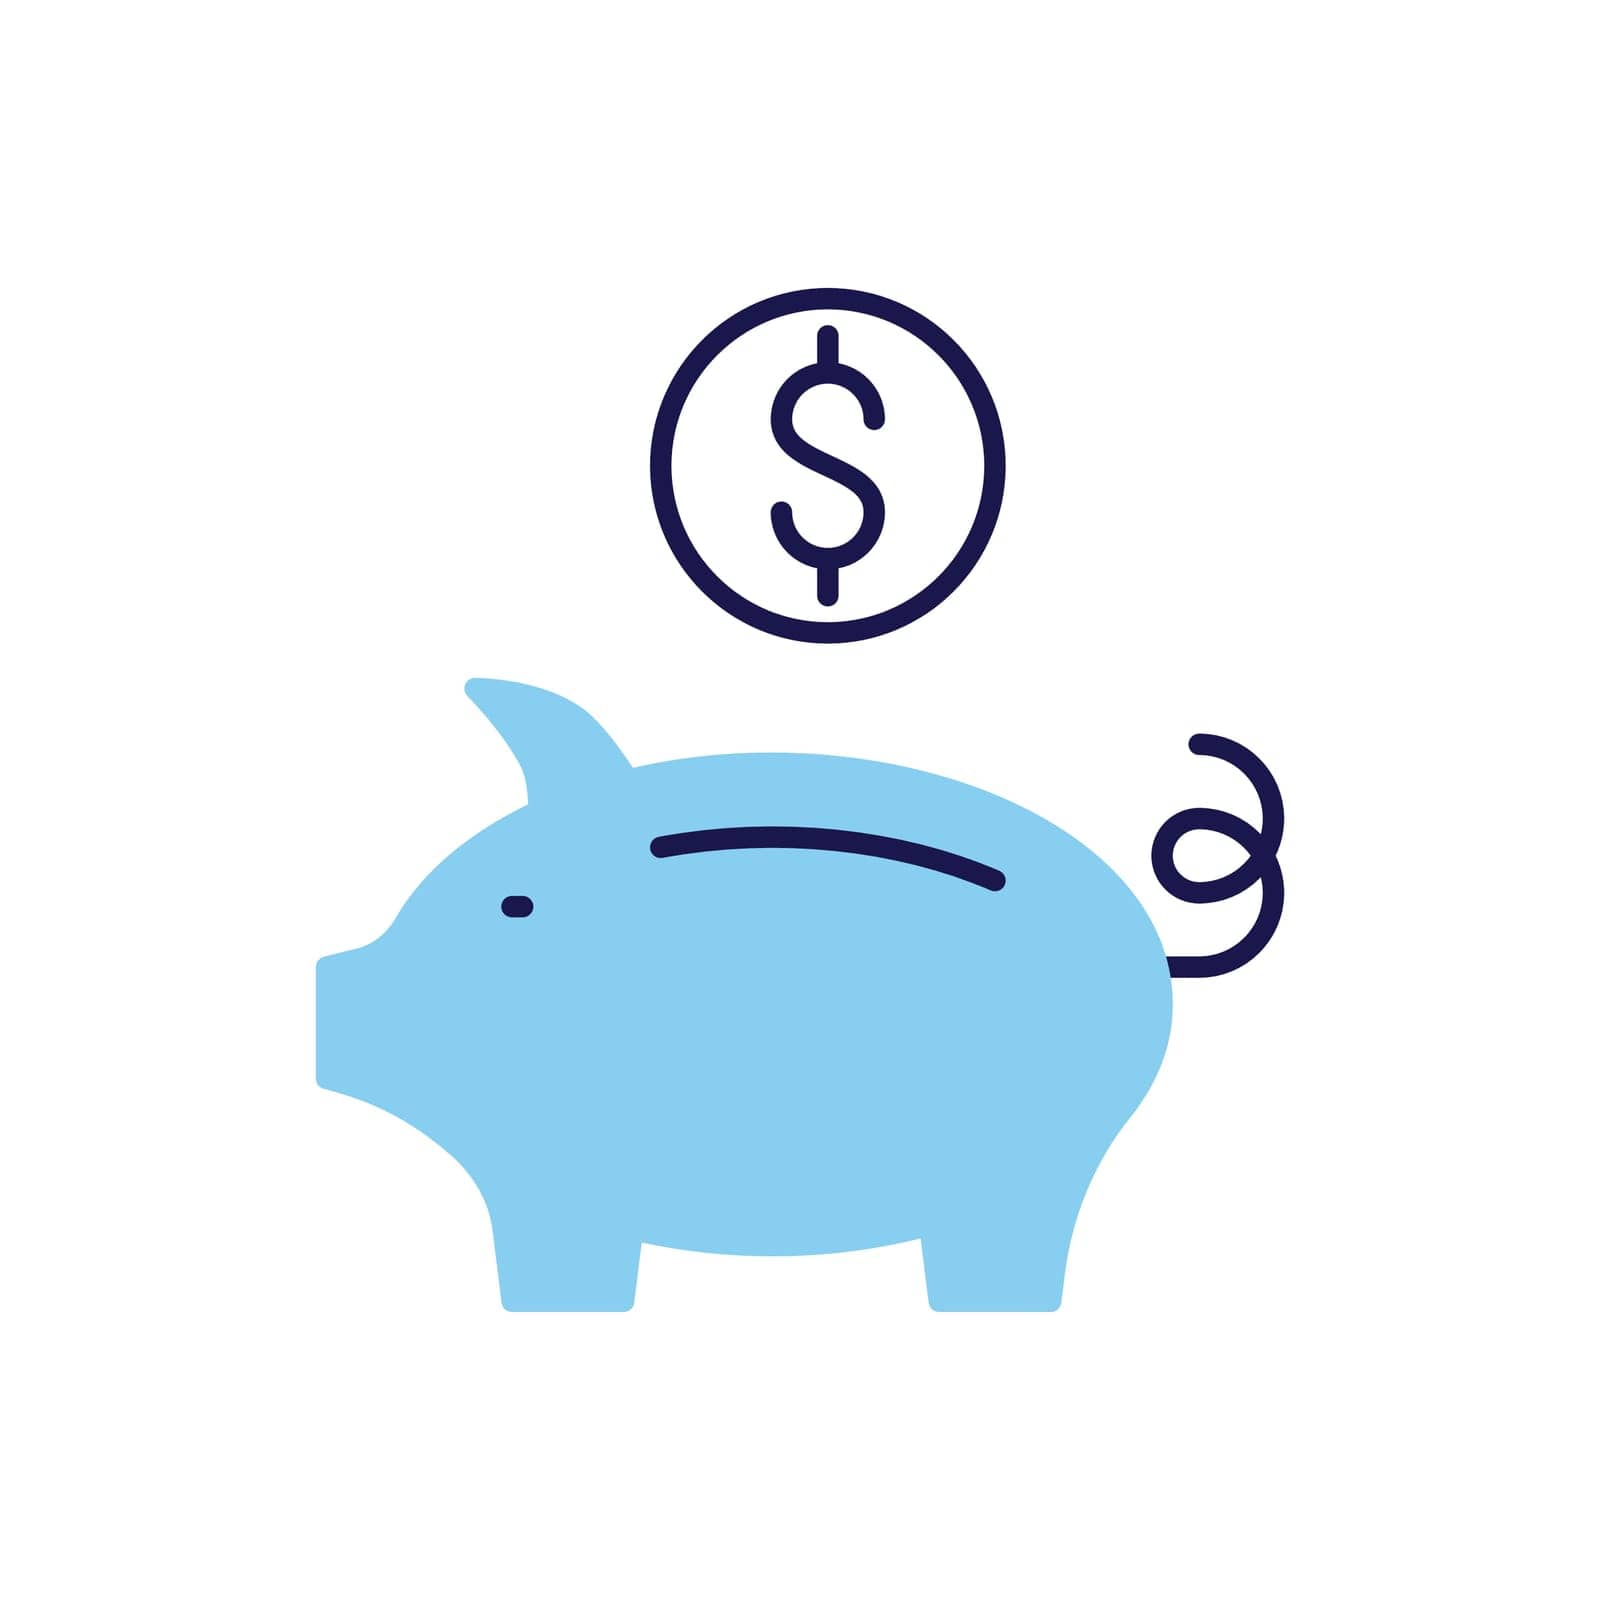 Piggy Bank related vector icon by smoki